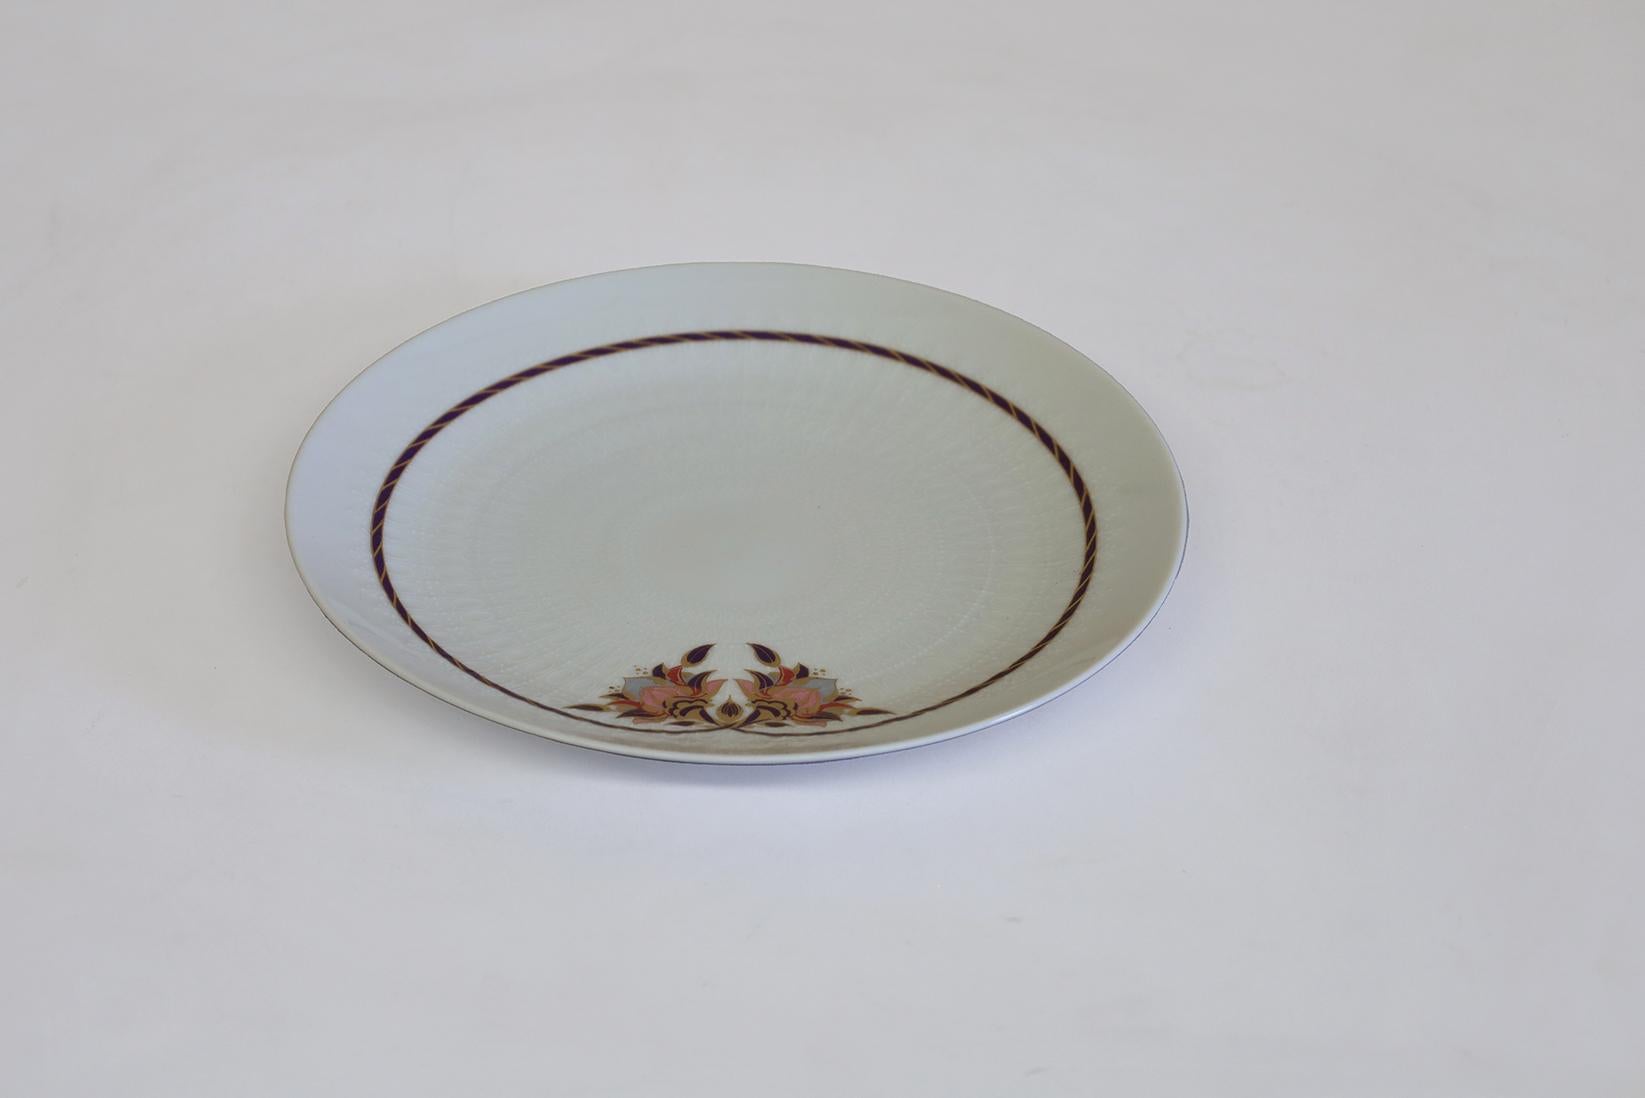 This is a set of 12 porcelain Salad Plates by Rosenthal.
Never used. 
Very nice texture and color combination.